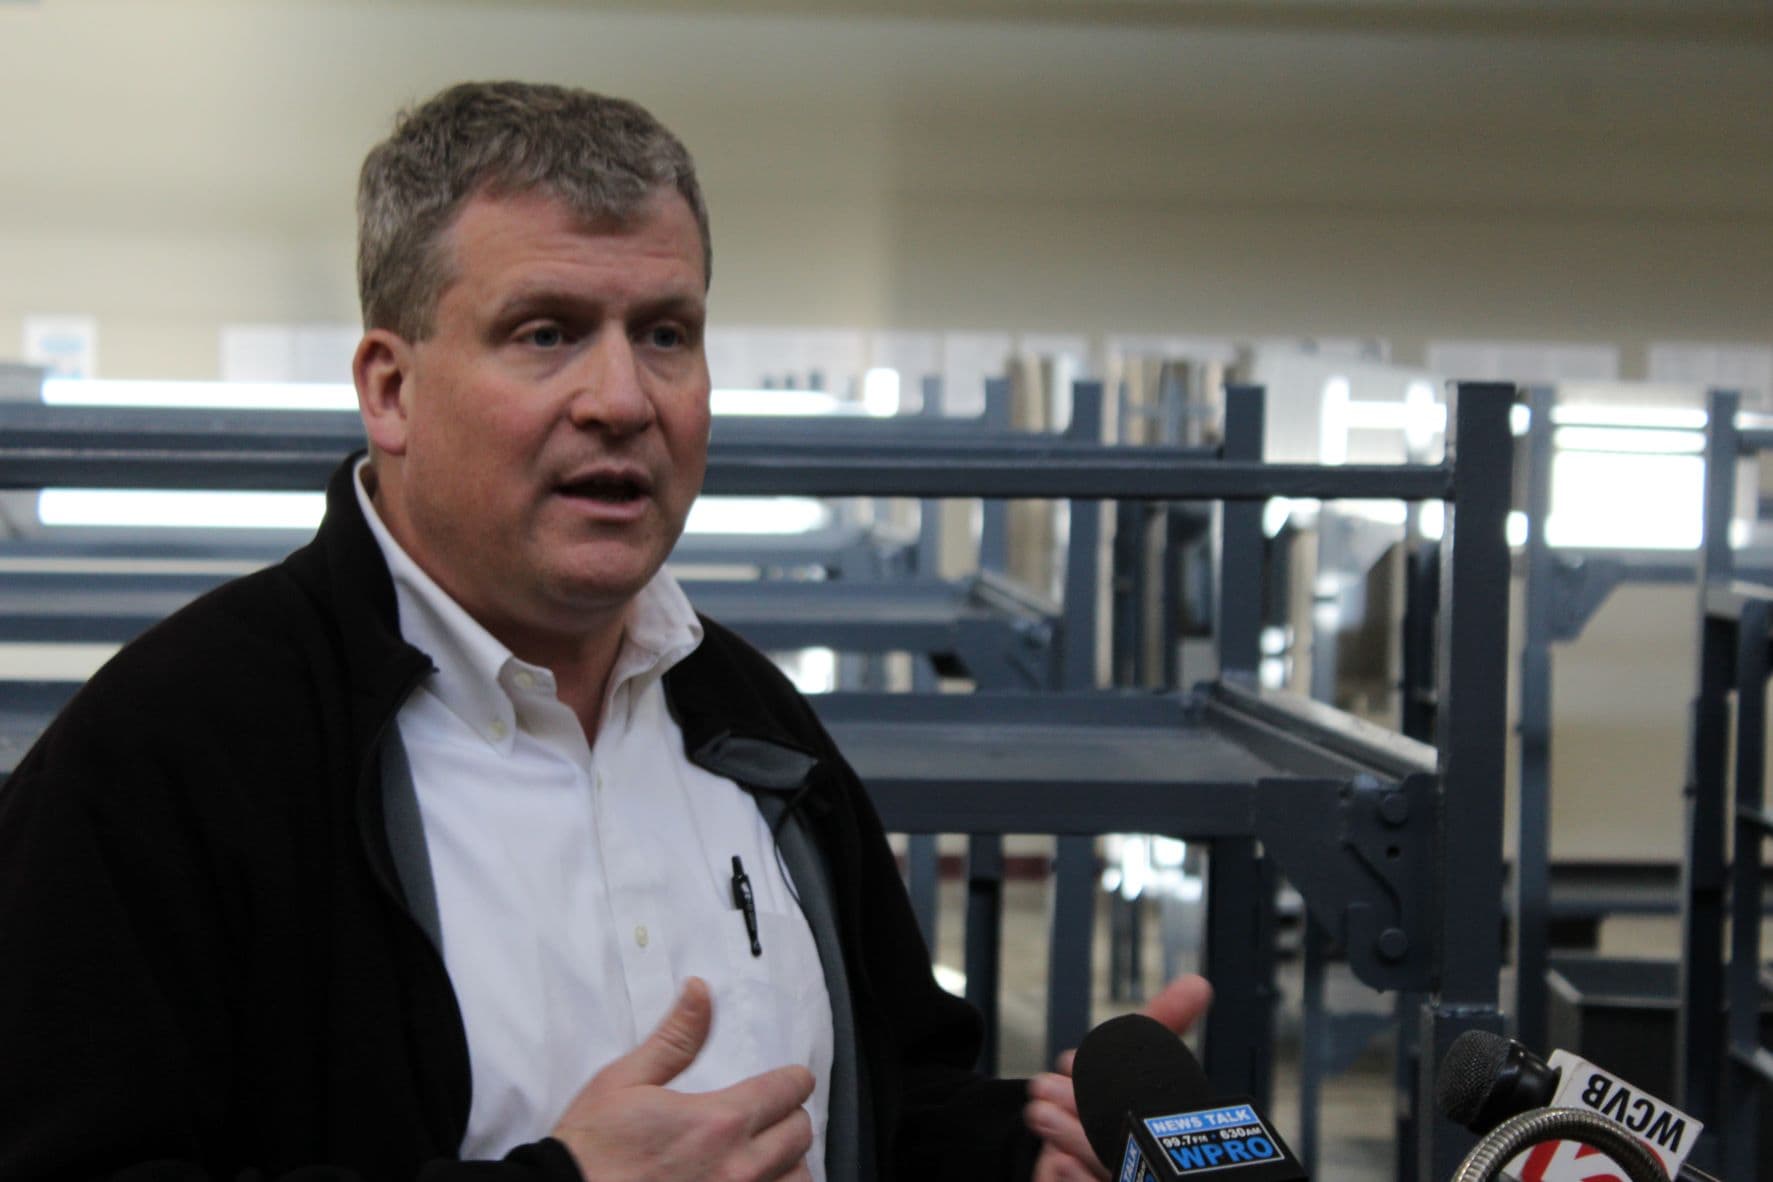 Bristol County Sheriff Paul Heroux hopes to renovate a former ICE detention center to house prisoners from the Ash Street Jail. (Ben Berke/The Public's Radio)